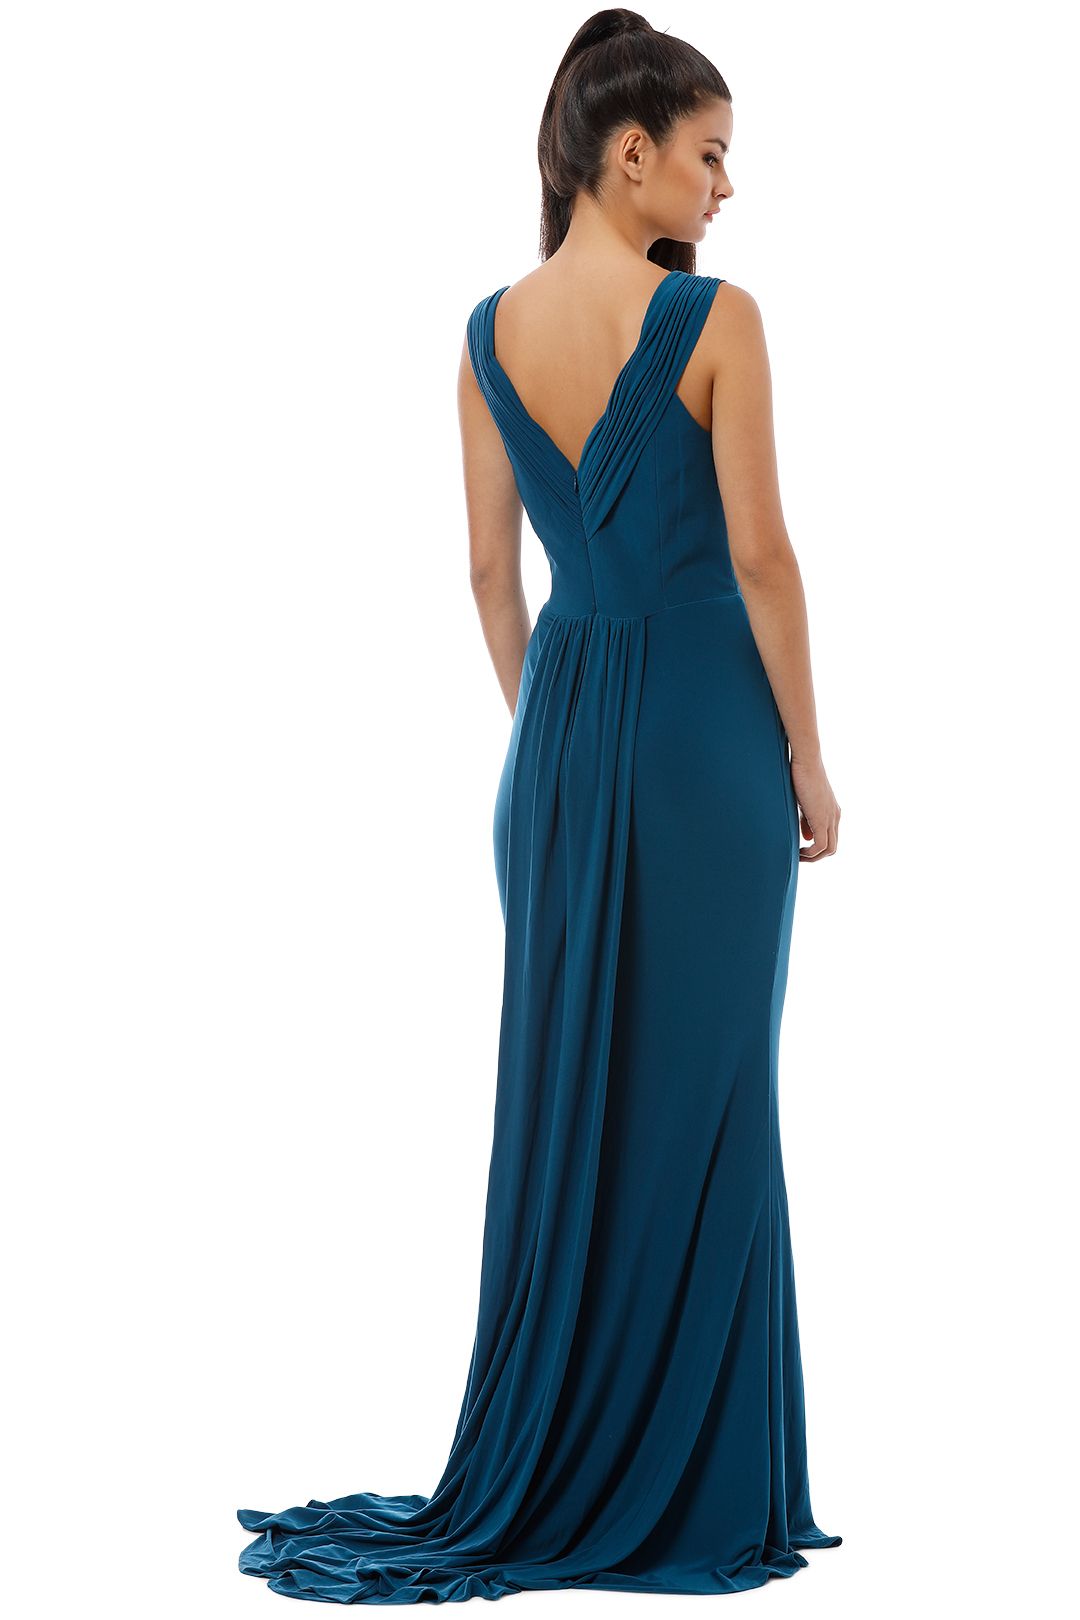 Tania Olsen - Malissa Gown - Teal - Back